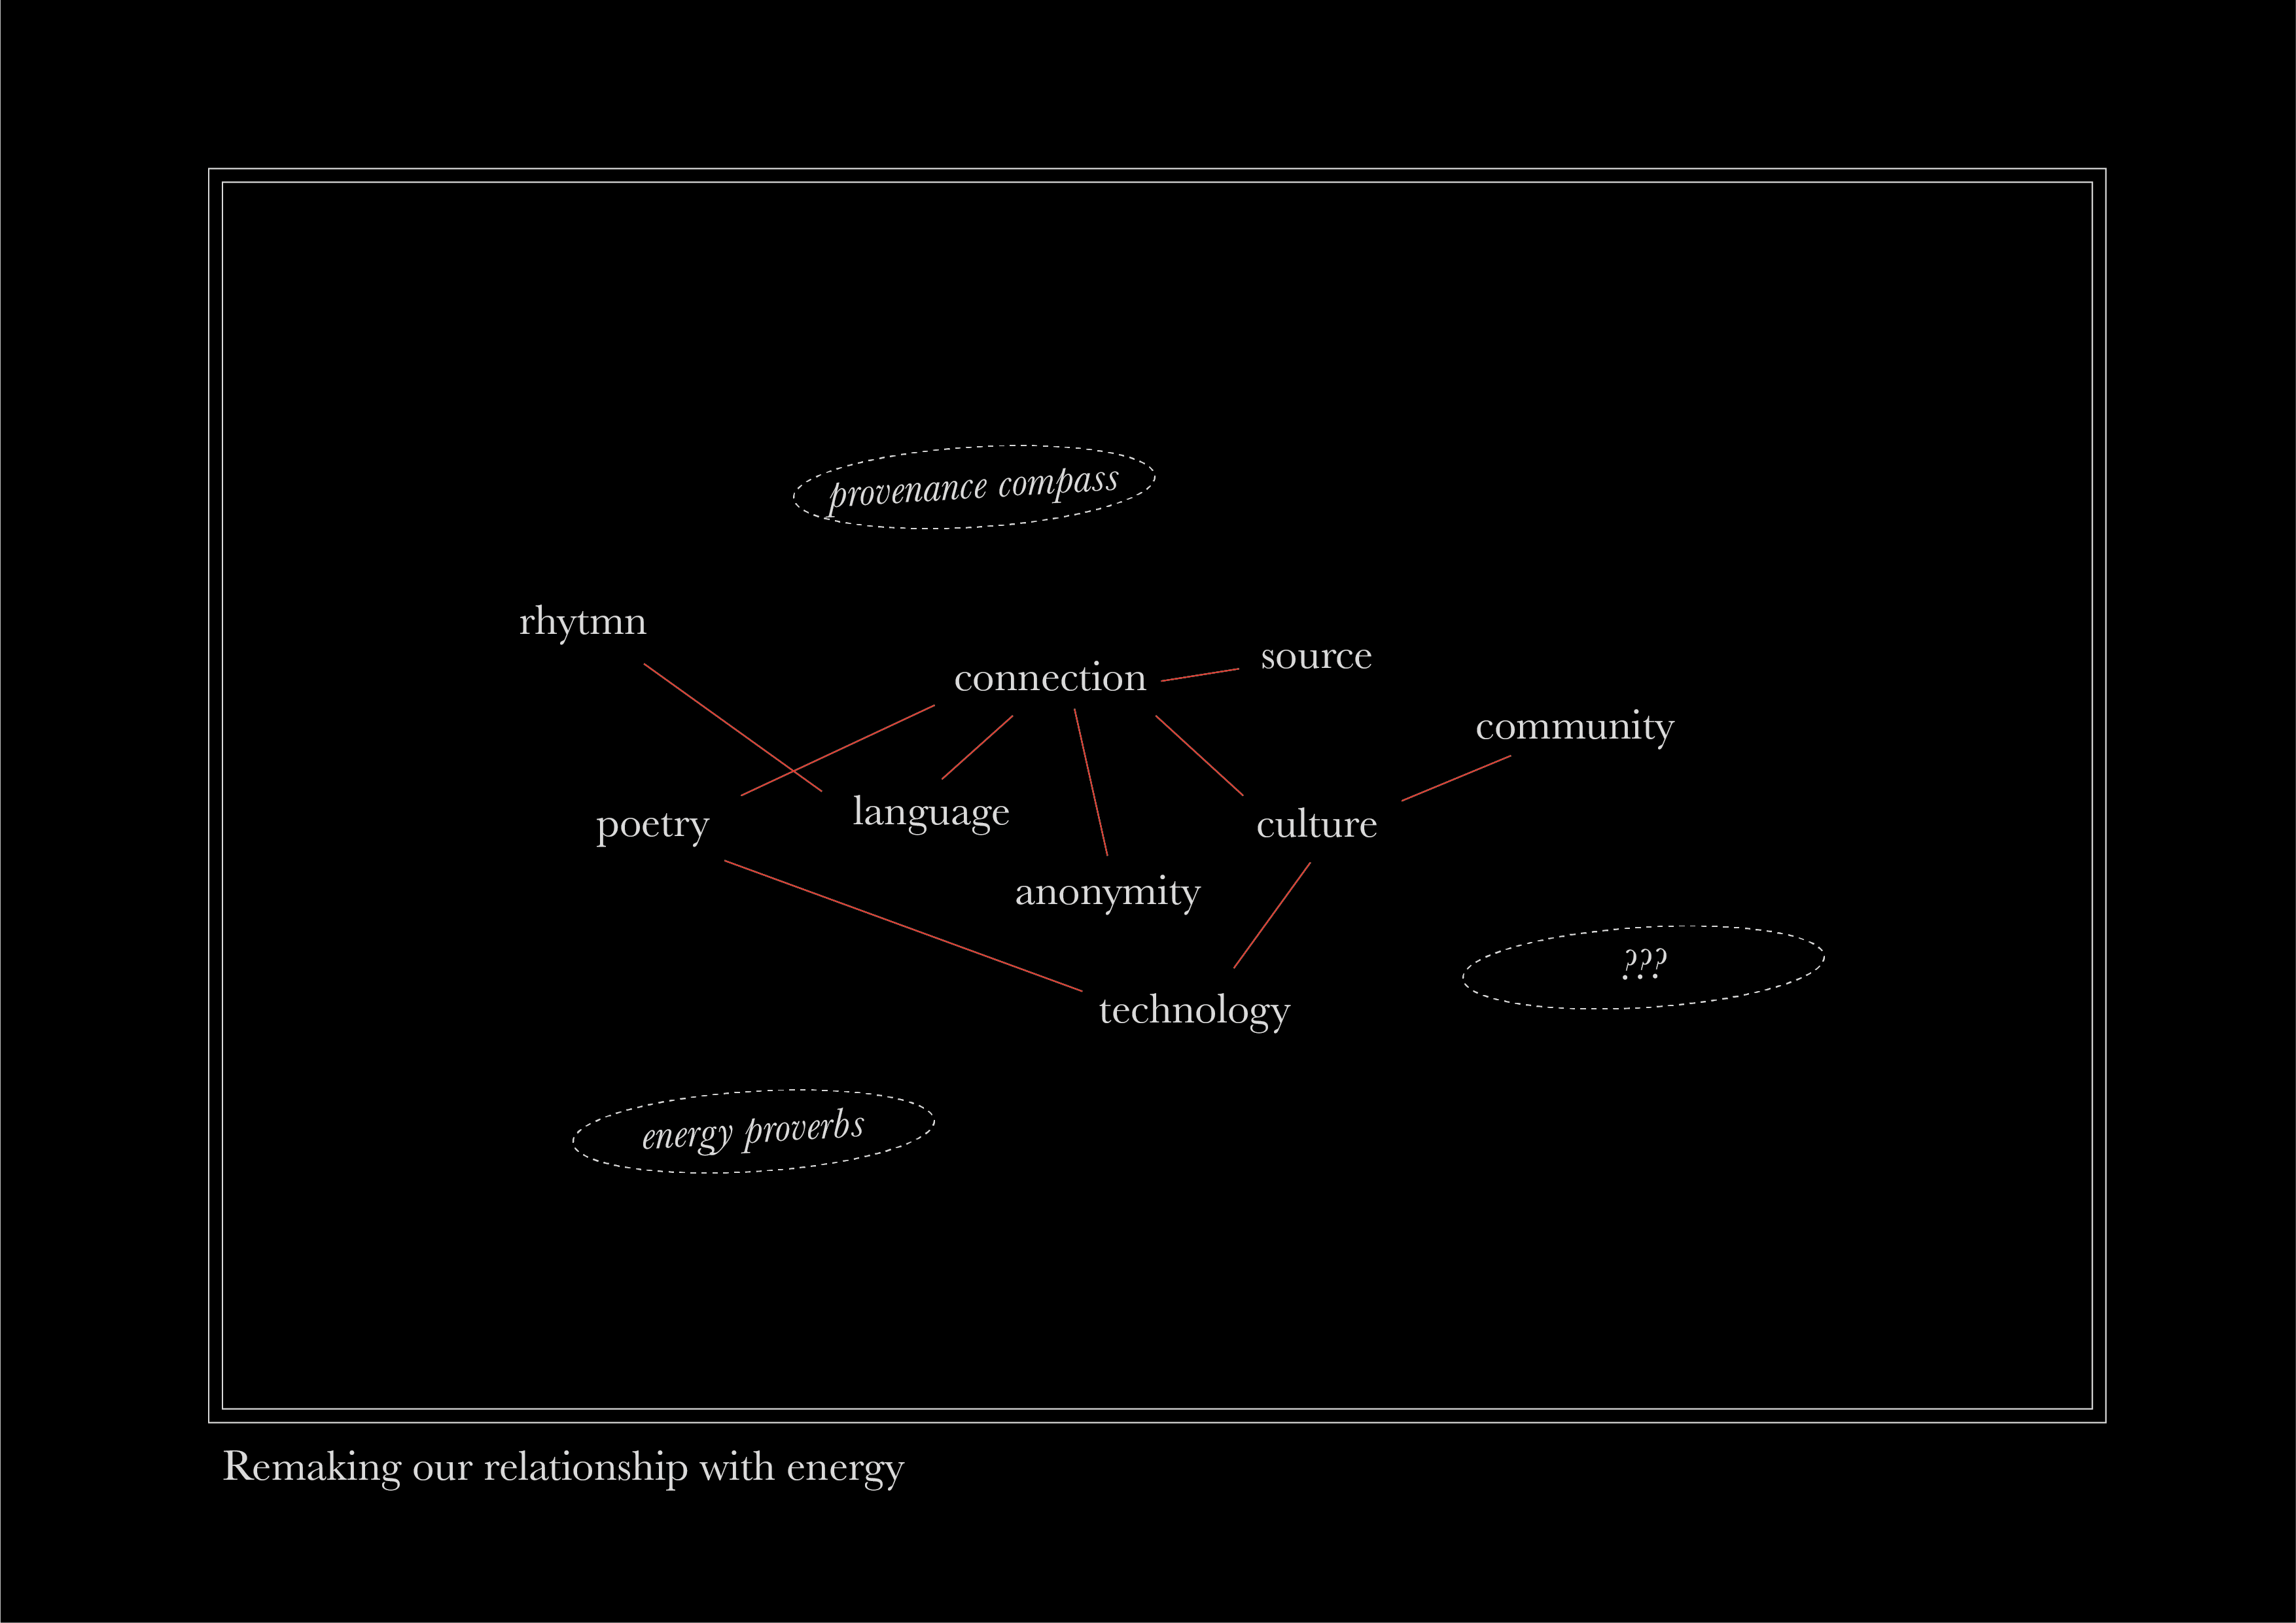 A diagram with a word cloud in the middle and three nodes with text in the periphery. The word cloud contains the words rhytmn, poetry, language, connection, source, anonymity, culture, technology, community. The three nodes say provenance compass, energy proverbs, and ???.